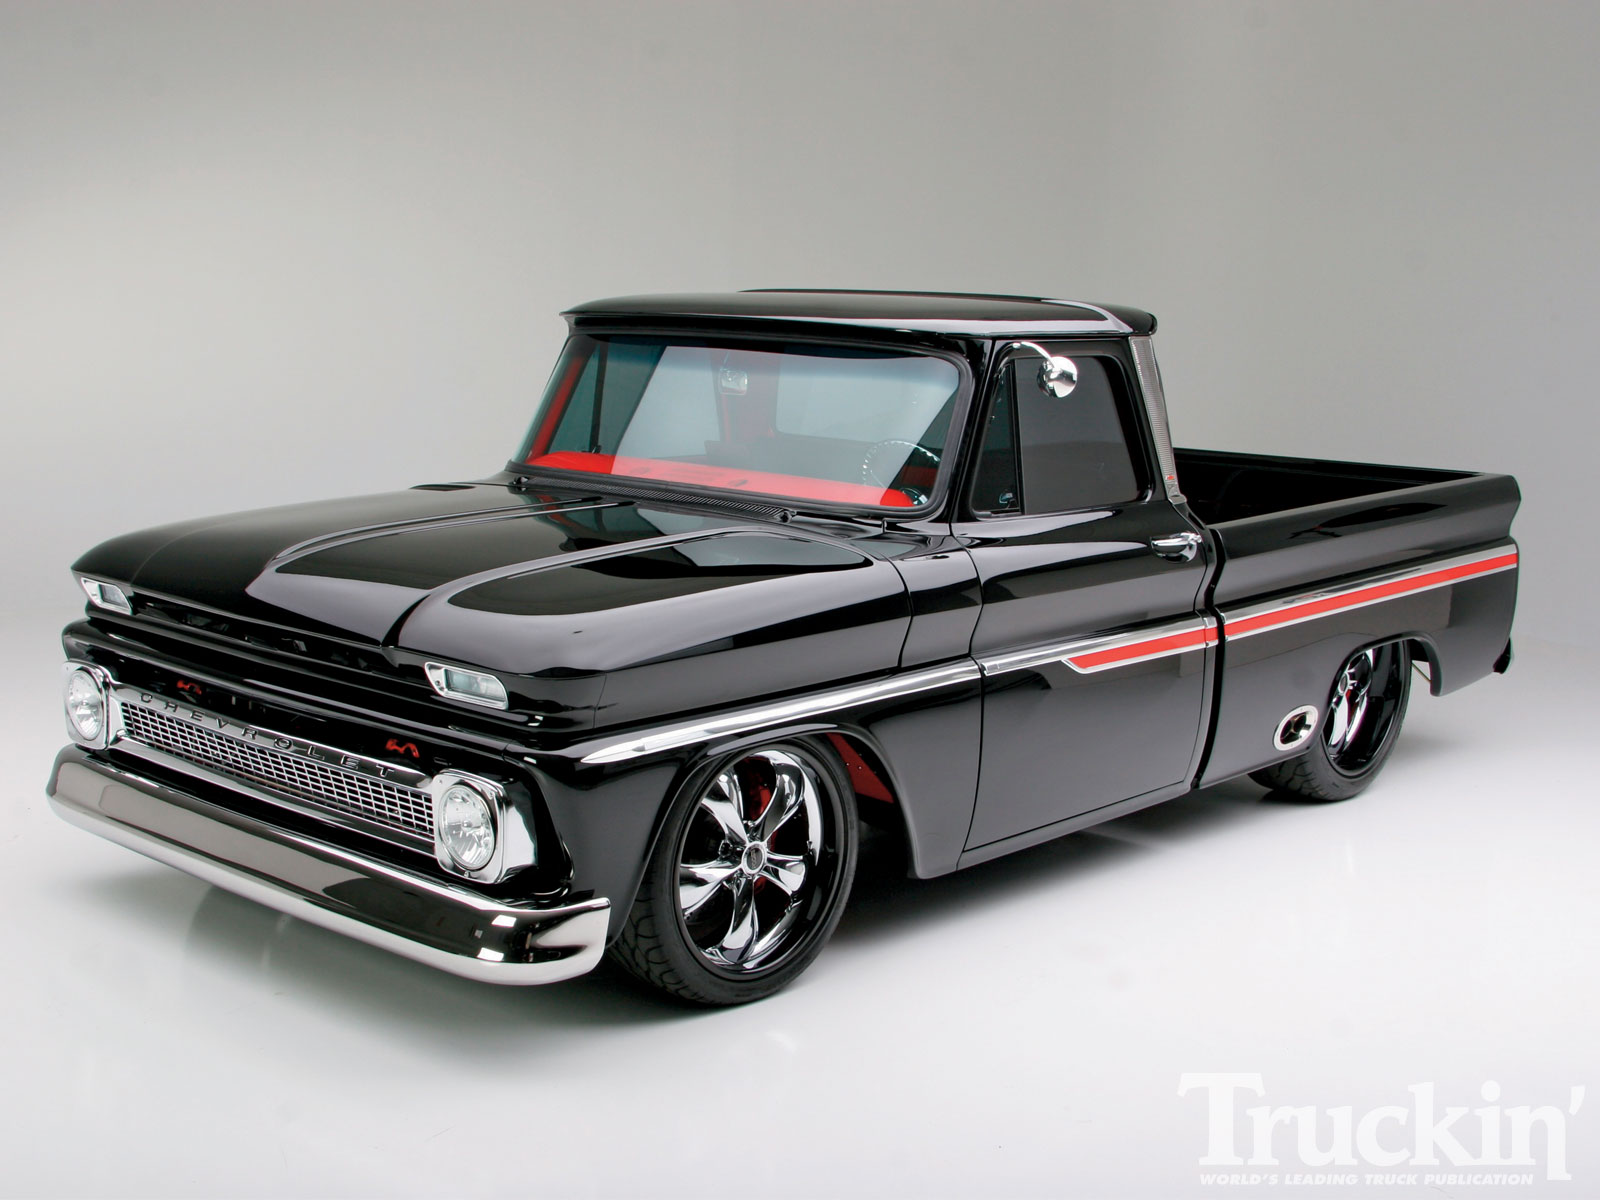 Chevy Truck Wallpaper HD In Cars Imageci